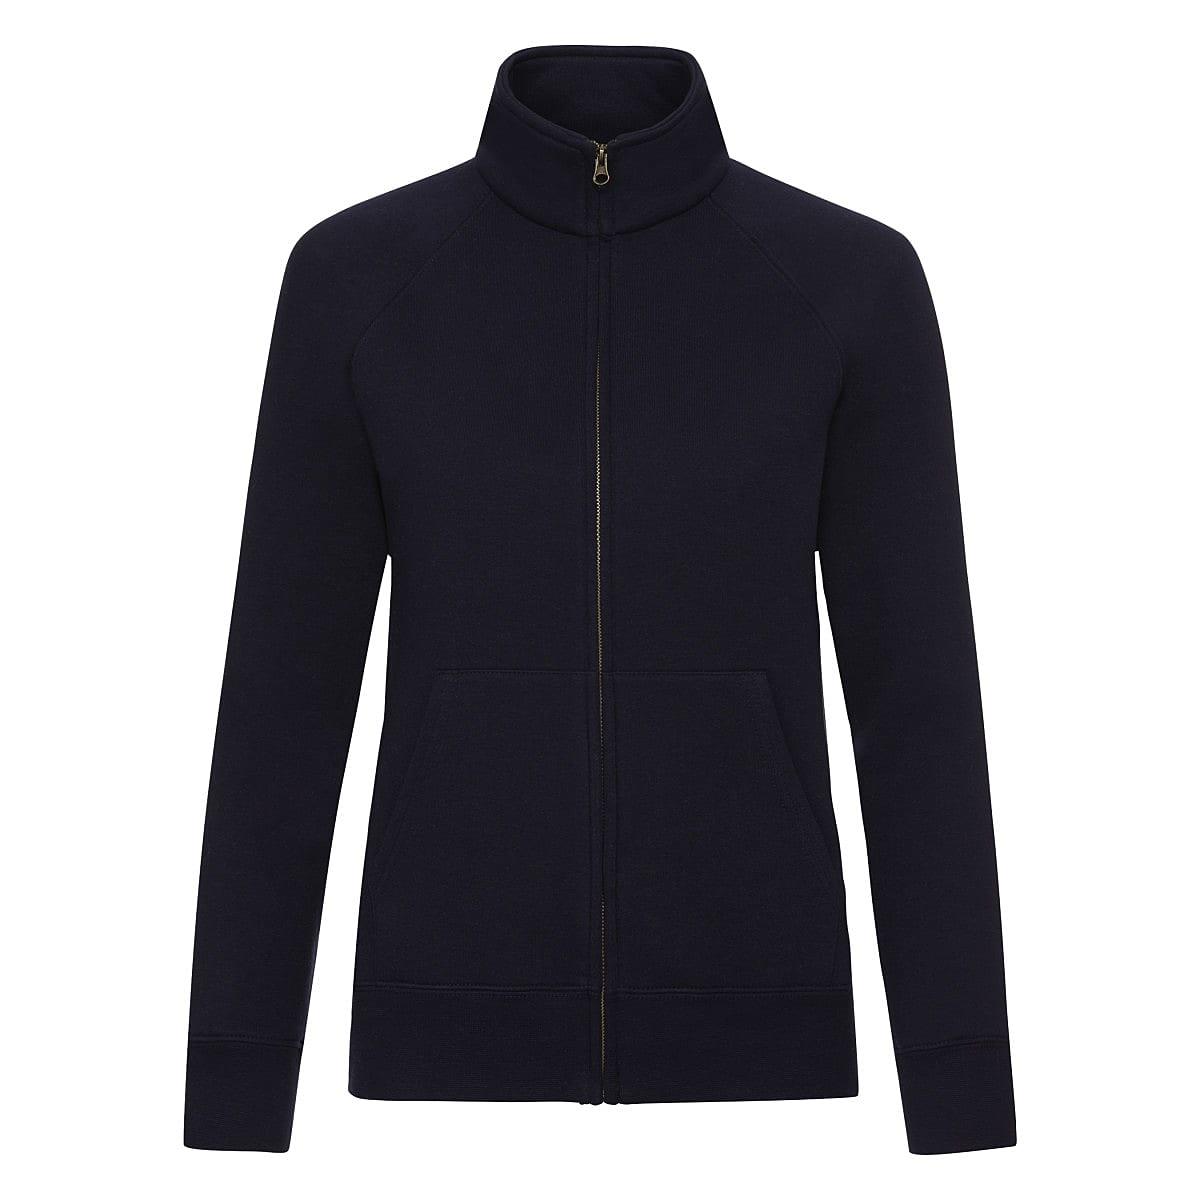 Fruit Of The Loom Lady-Fit Sweat Jacket in Deep Navy (Product Code: 62116)